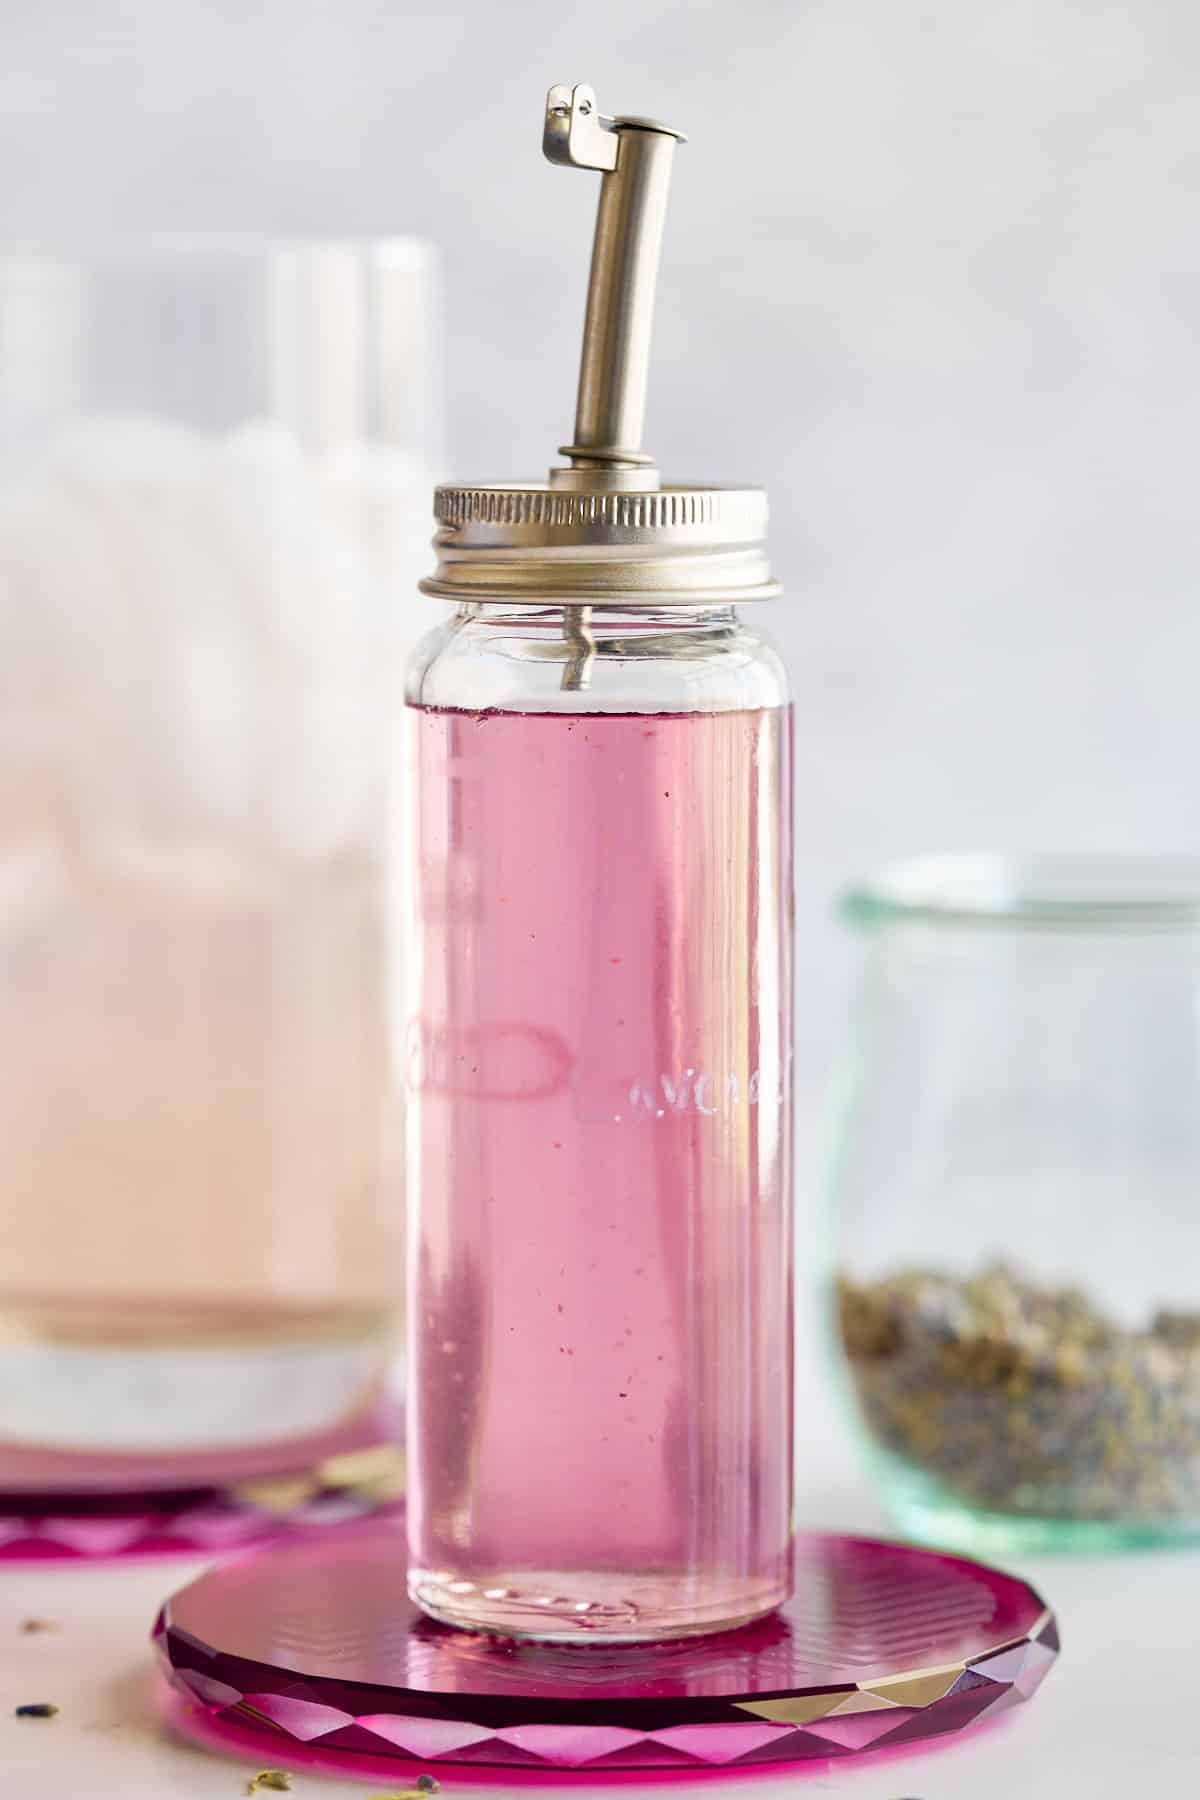 lavender simple syrup ina bottle